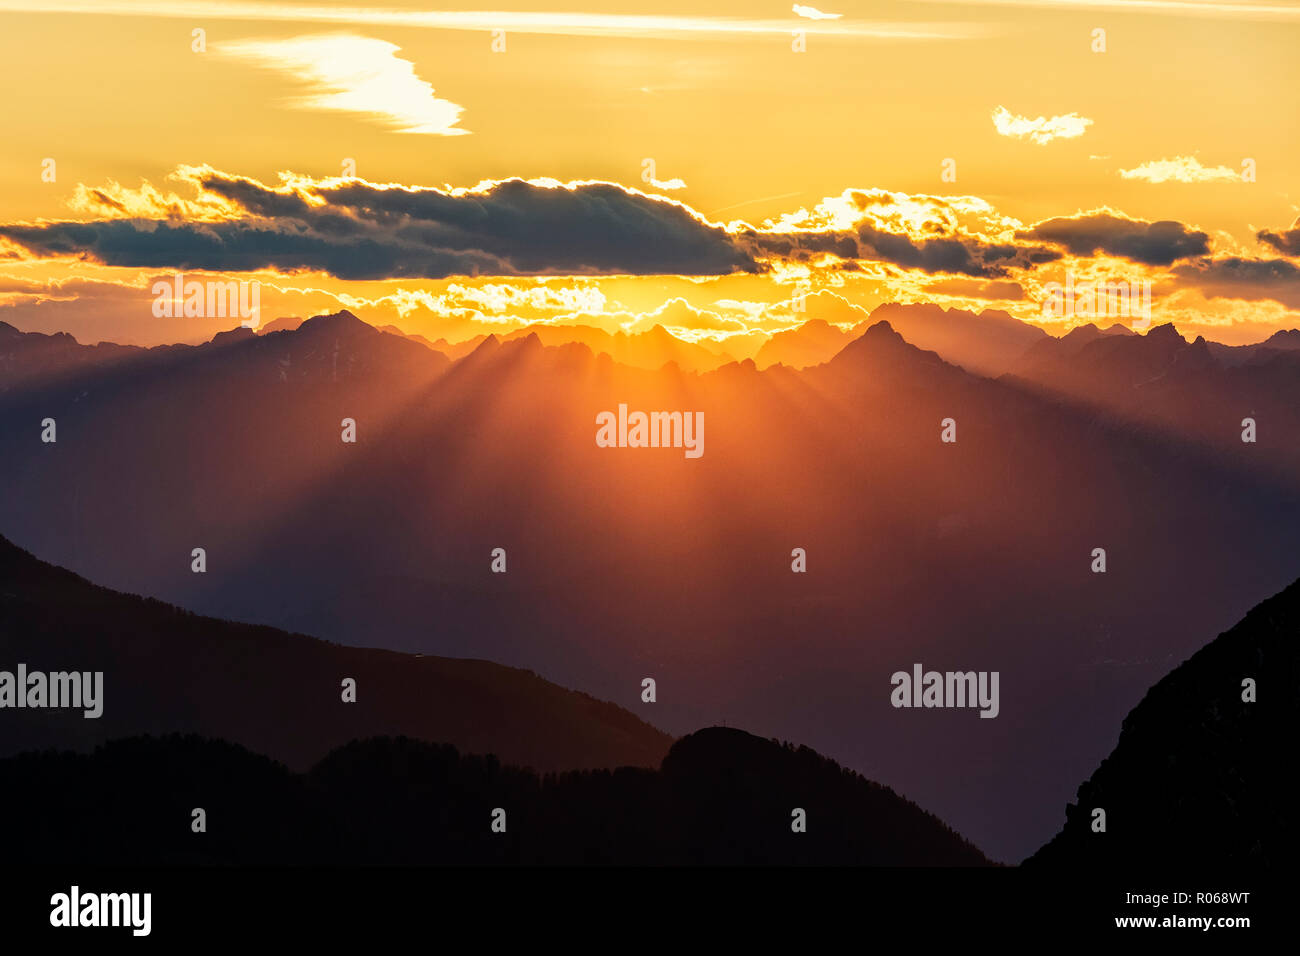 Sun rays at sunset on Pizzo Berro and Gerola Valley seen from San Marco Pass, Orobie Alps, Bergamo province, Lombardy, Italy, Europe Stock Photo